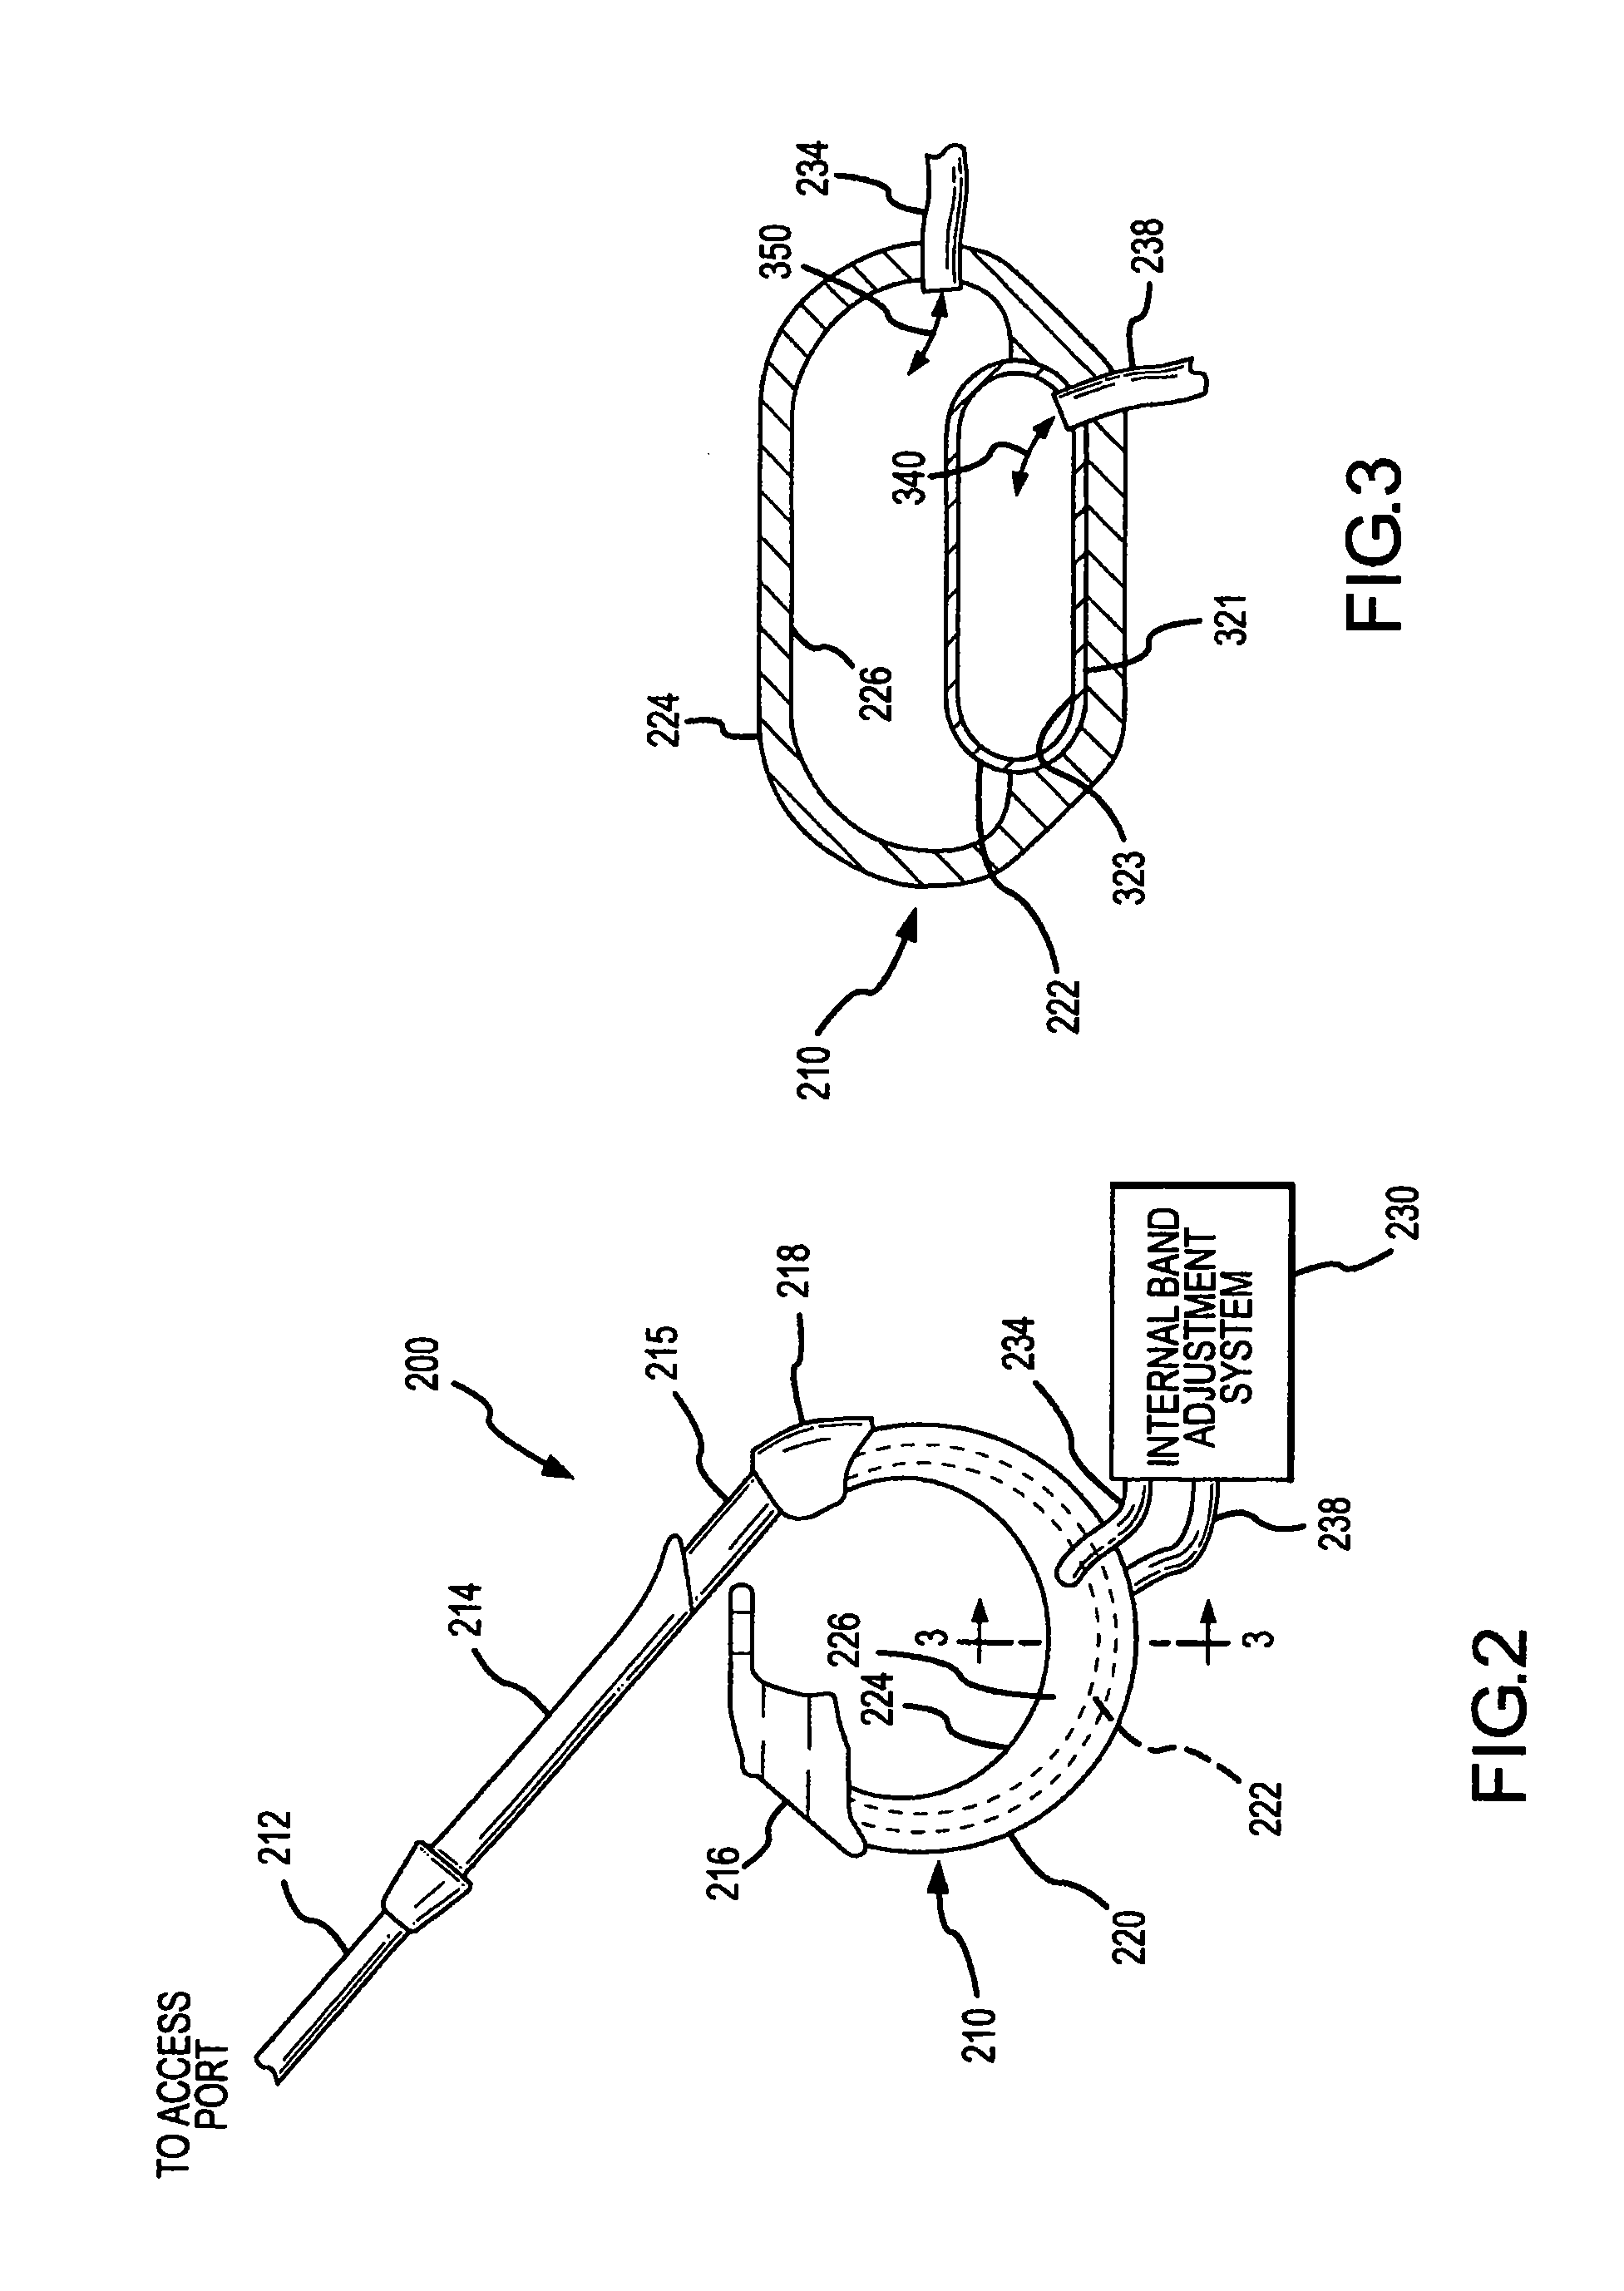 Self-regulating gastric band with pressure data processing